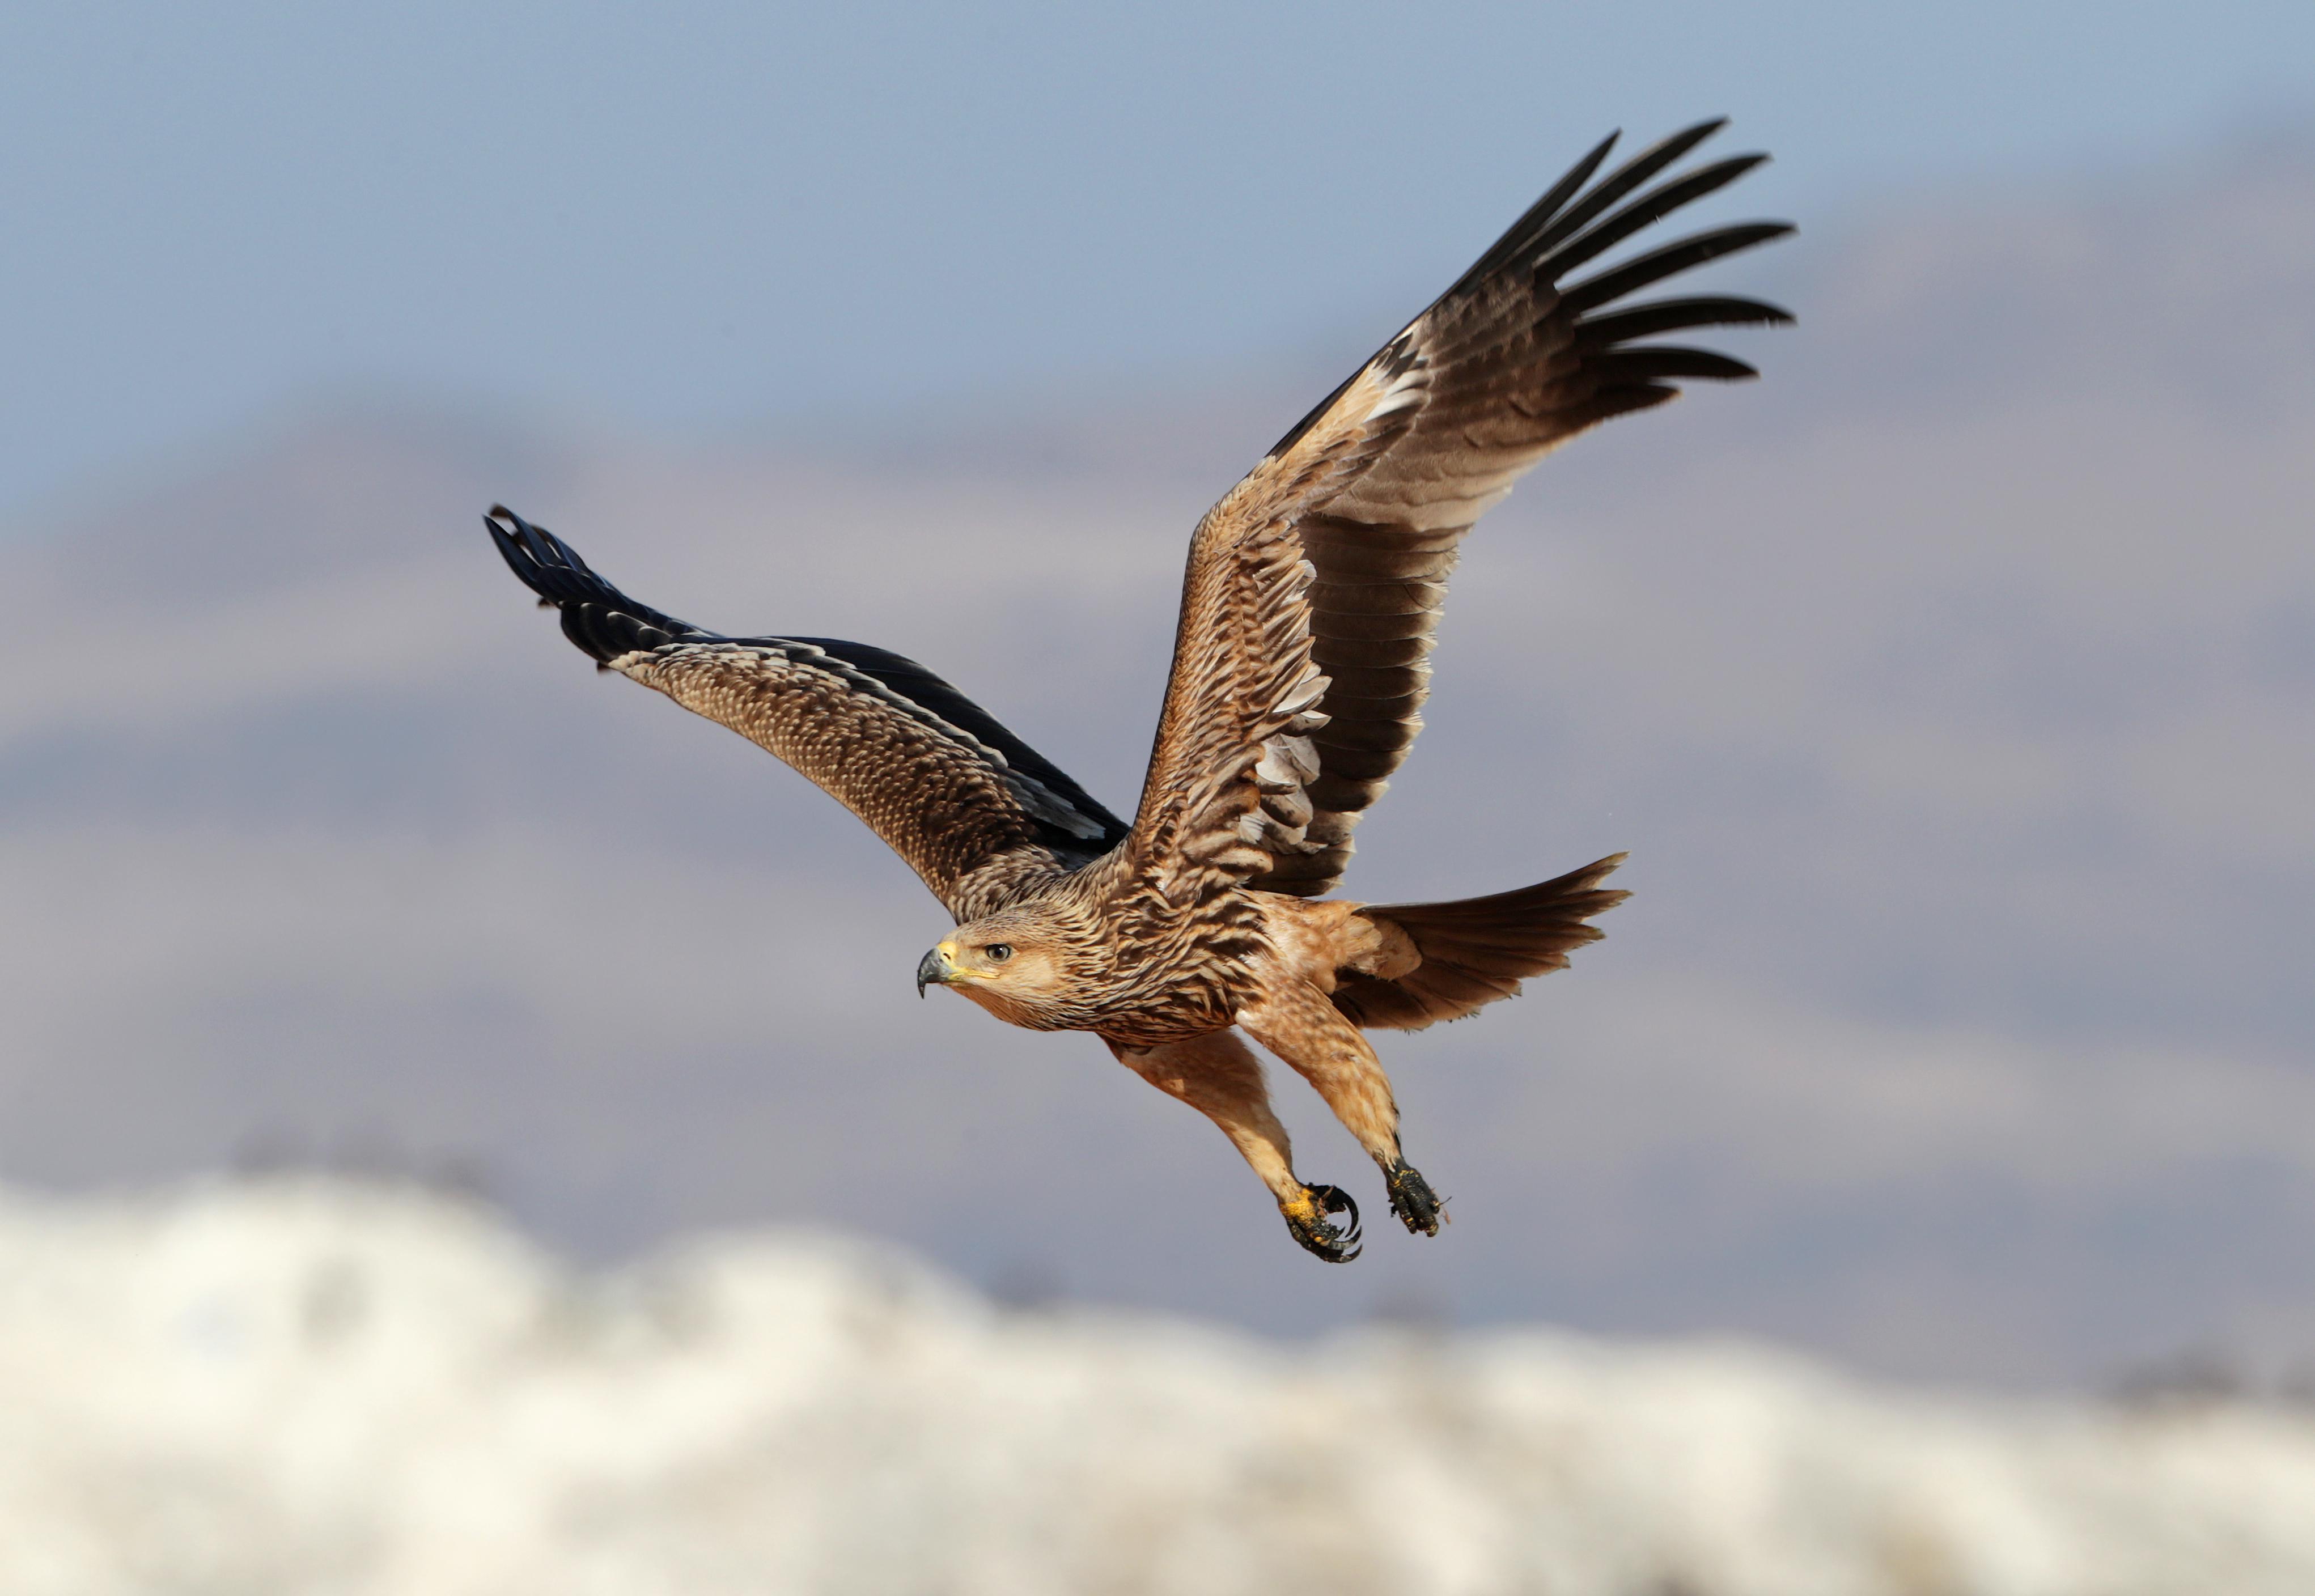 A mighty Eastern Imperial Eagle © Agami Photo Agency / Shutterstock